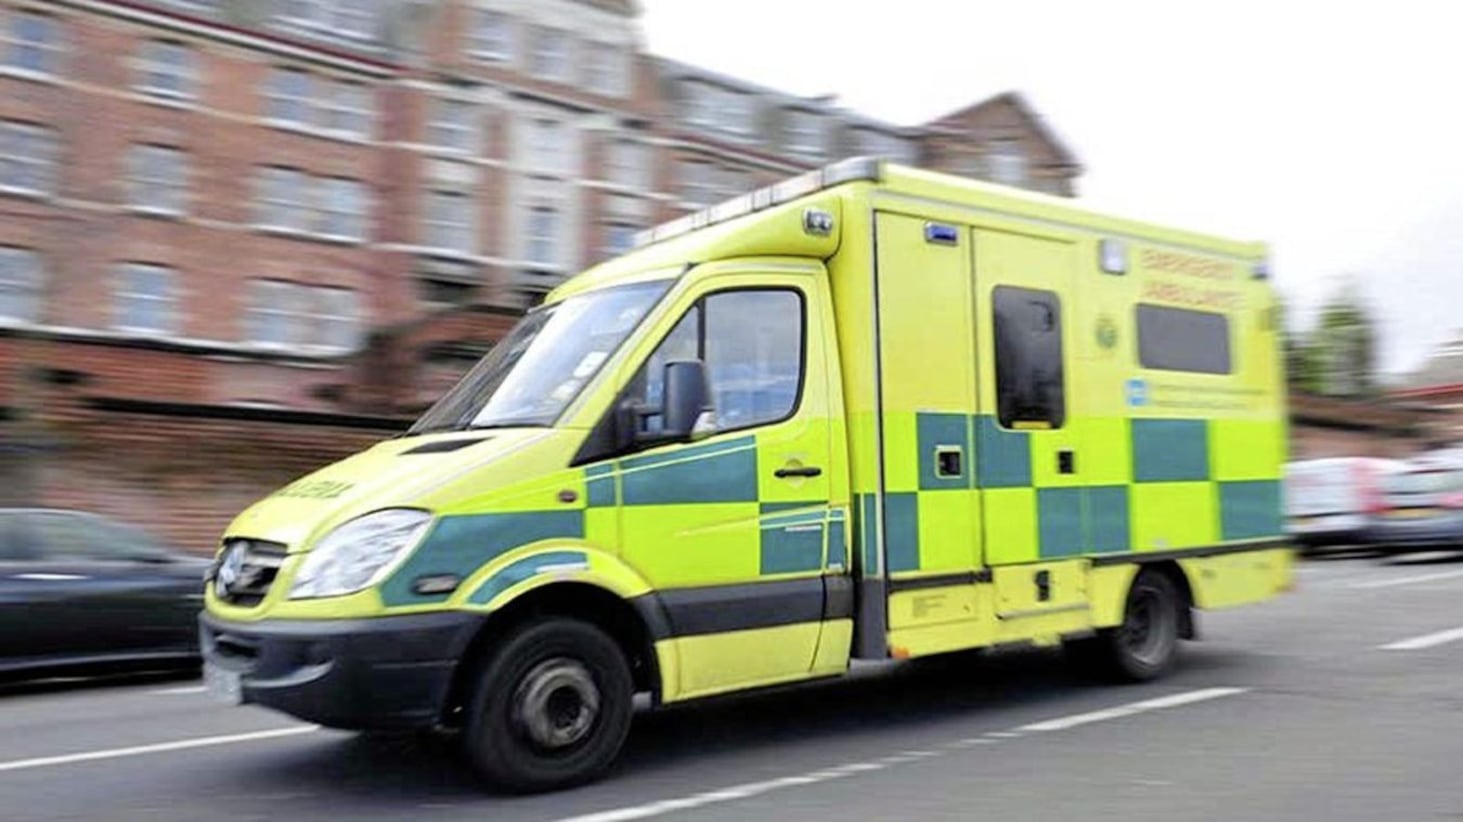 The child, who is believed to be of primary school age, was taken to hospital after being treated by ambulance personnel at the scene.